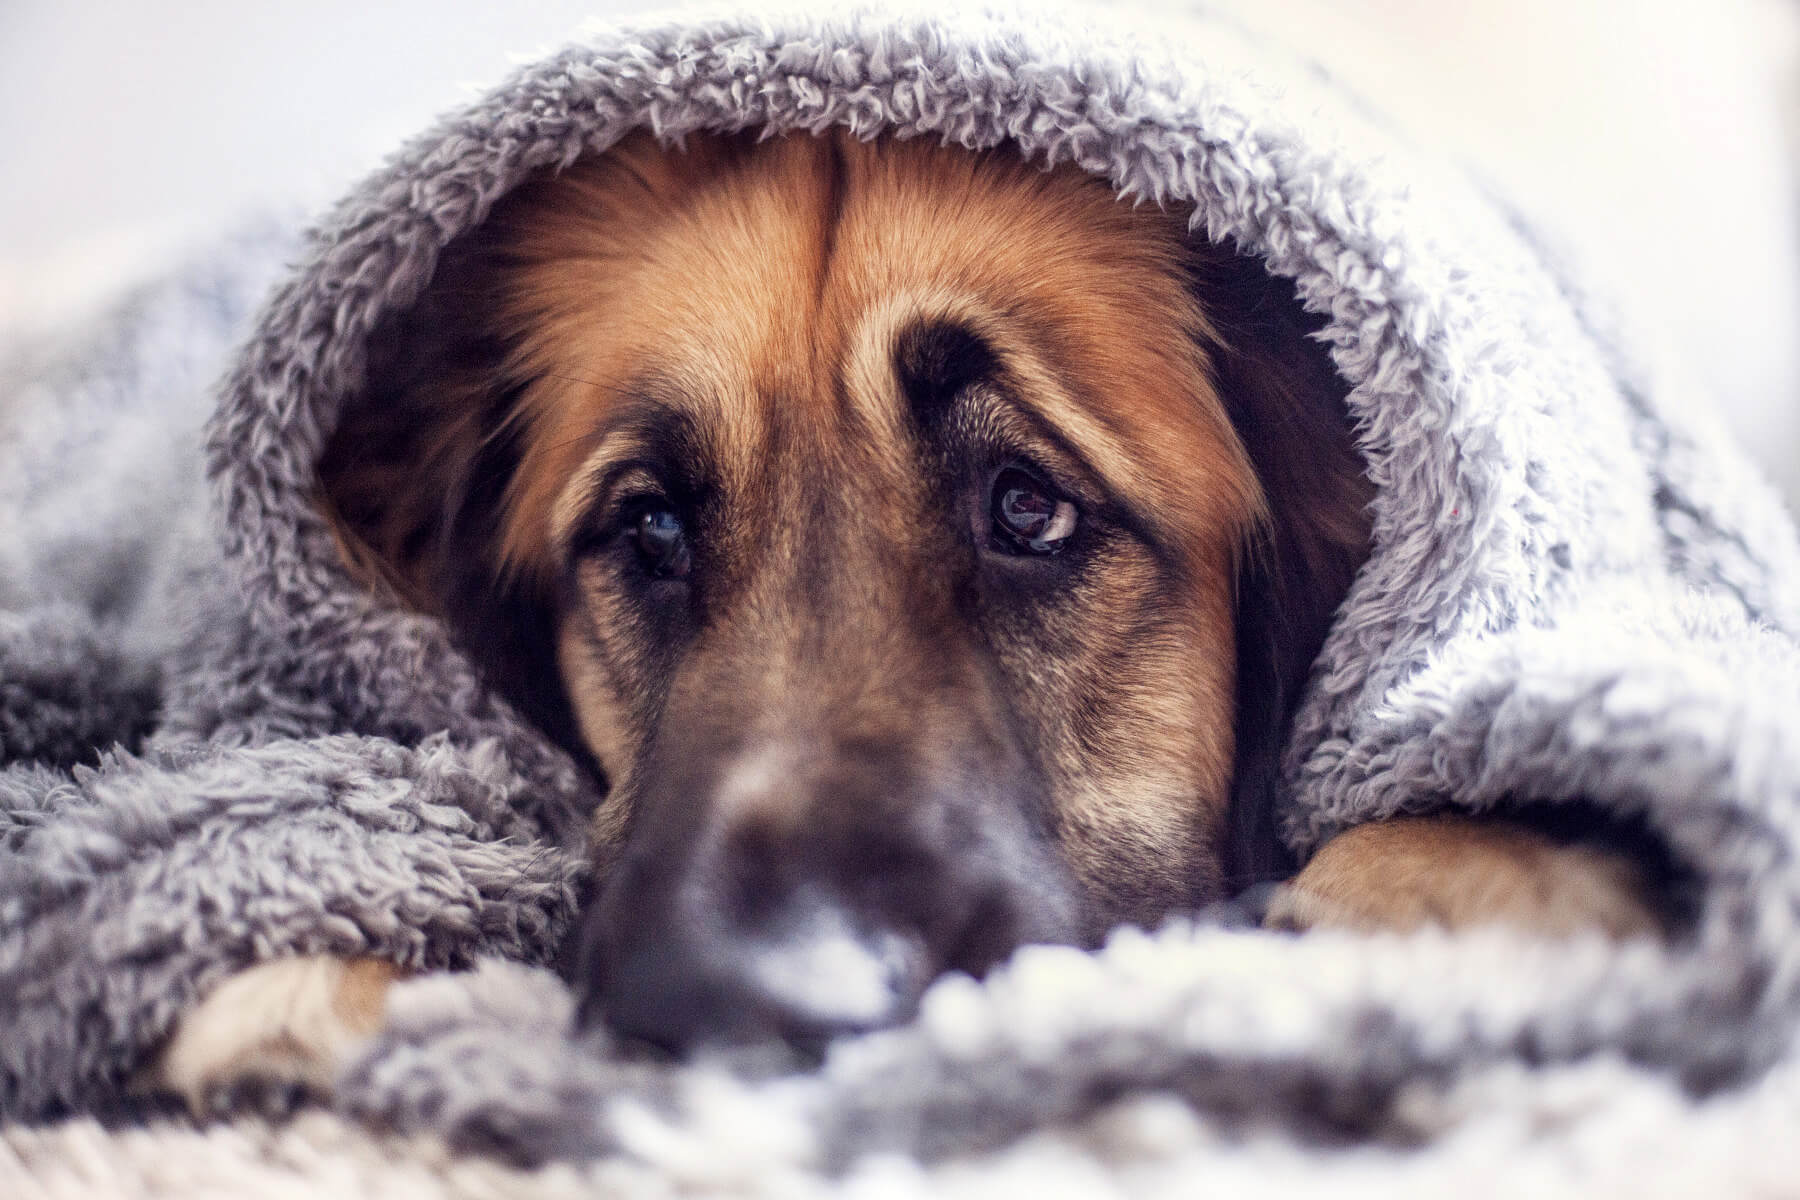 5 Ways to Comfort Your Fireworks-Averse Dog